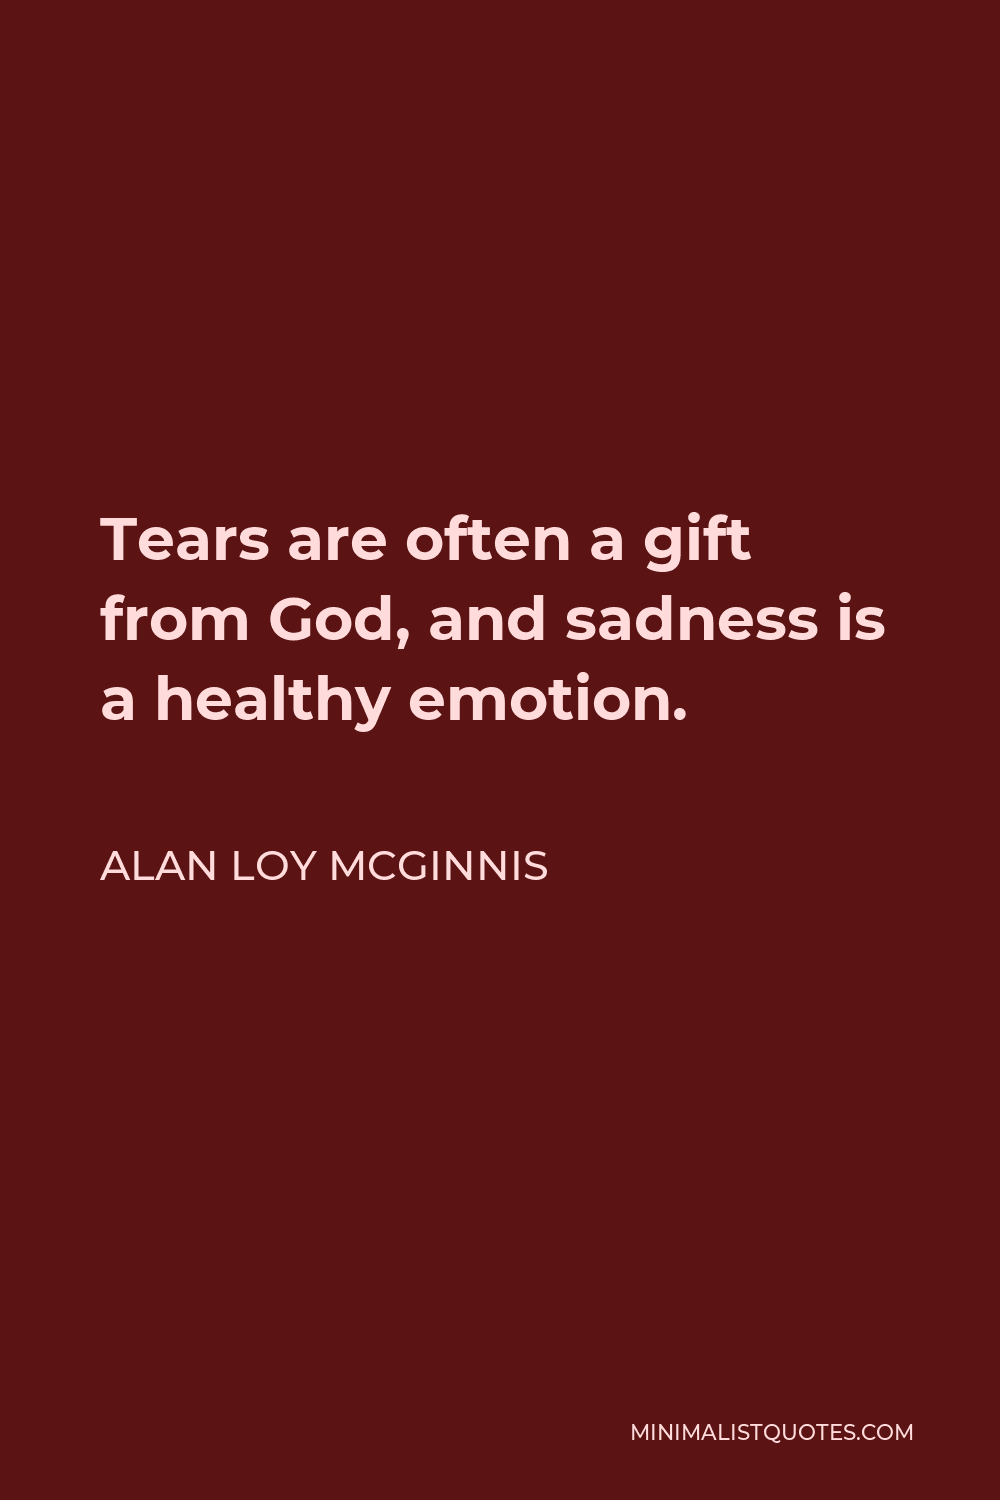 Alan Loy McGinnis Quote - Tears are often a gift from God, and sadness is a healthy emotion.